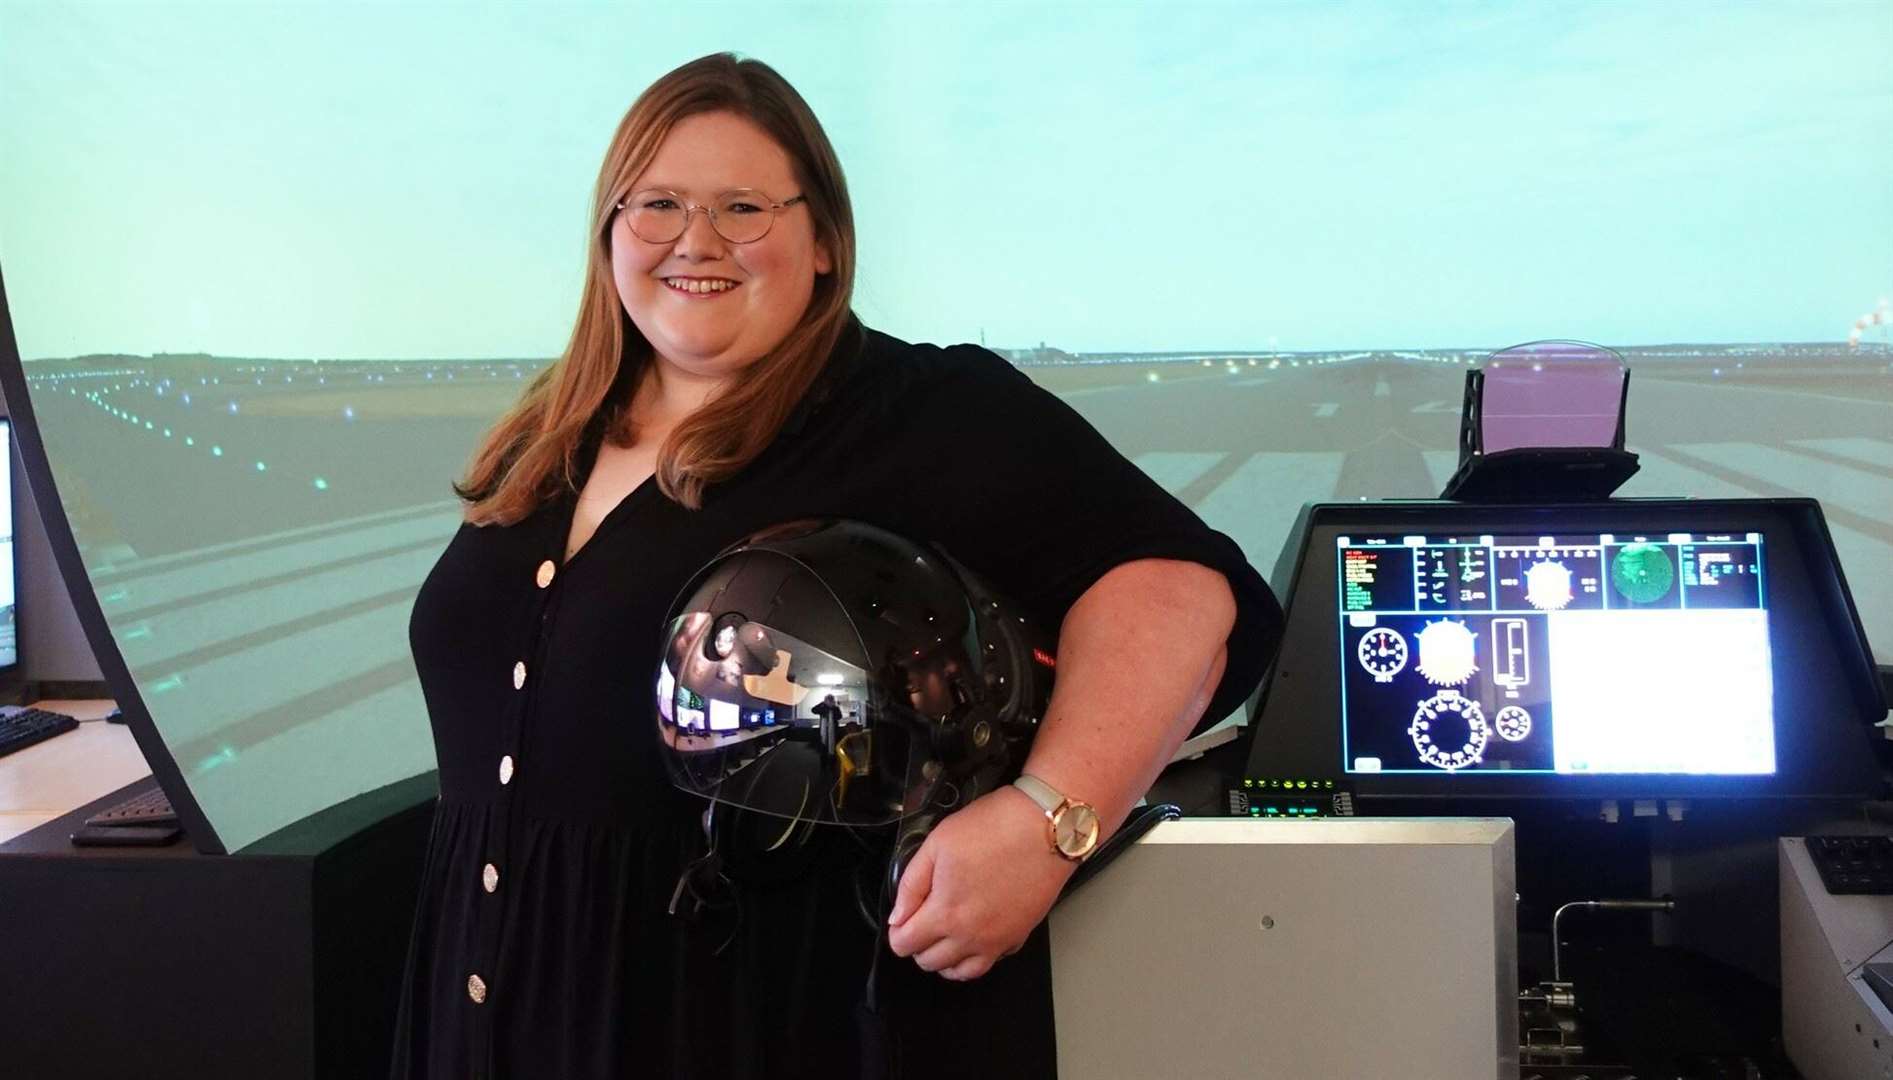 Alexa Hancocks is an Engineer at BAE Systems in Rochester. As part of her role she has performed various hardware tests on the company’s Striker ® II Helmet-Mounted Display, in a scientific environment.